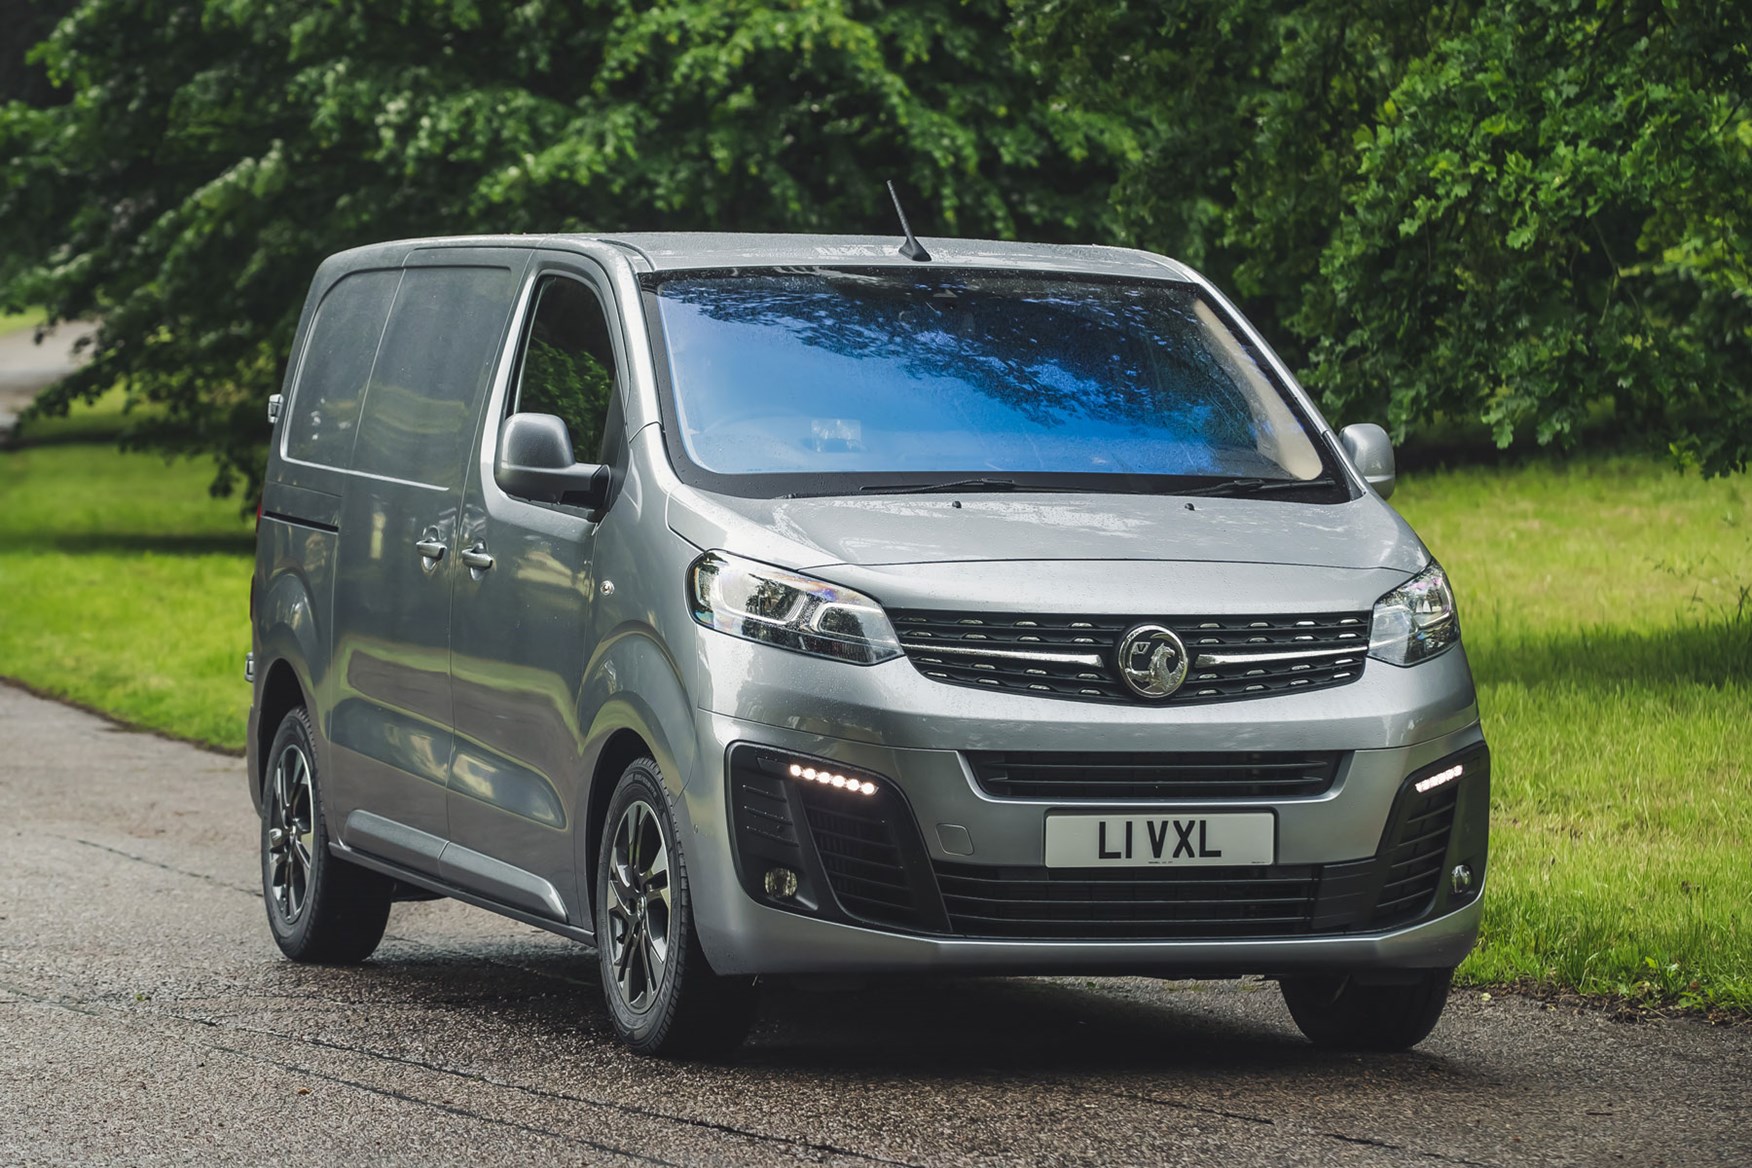 Vauxhall Vivaro review - front view, driving, silver